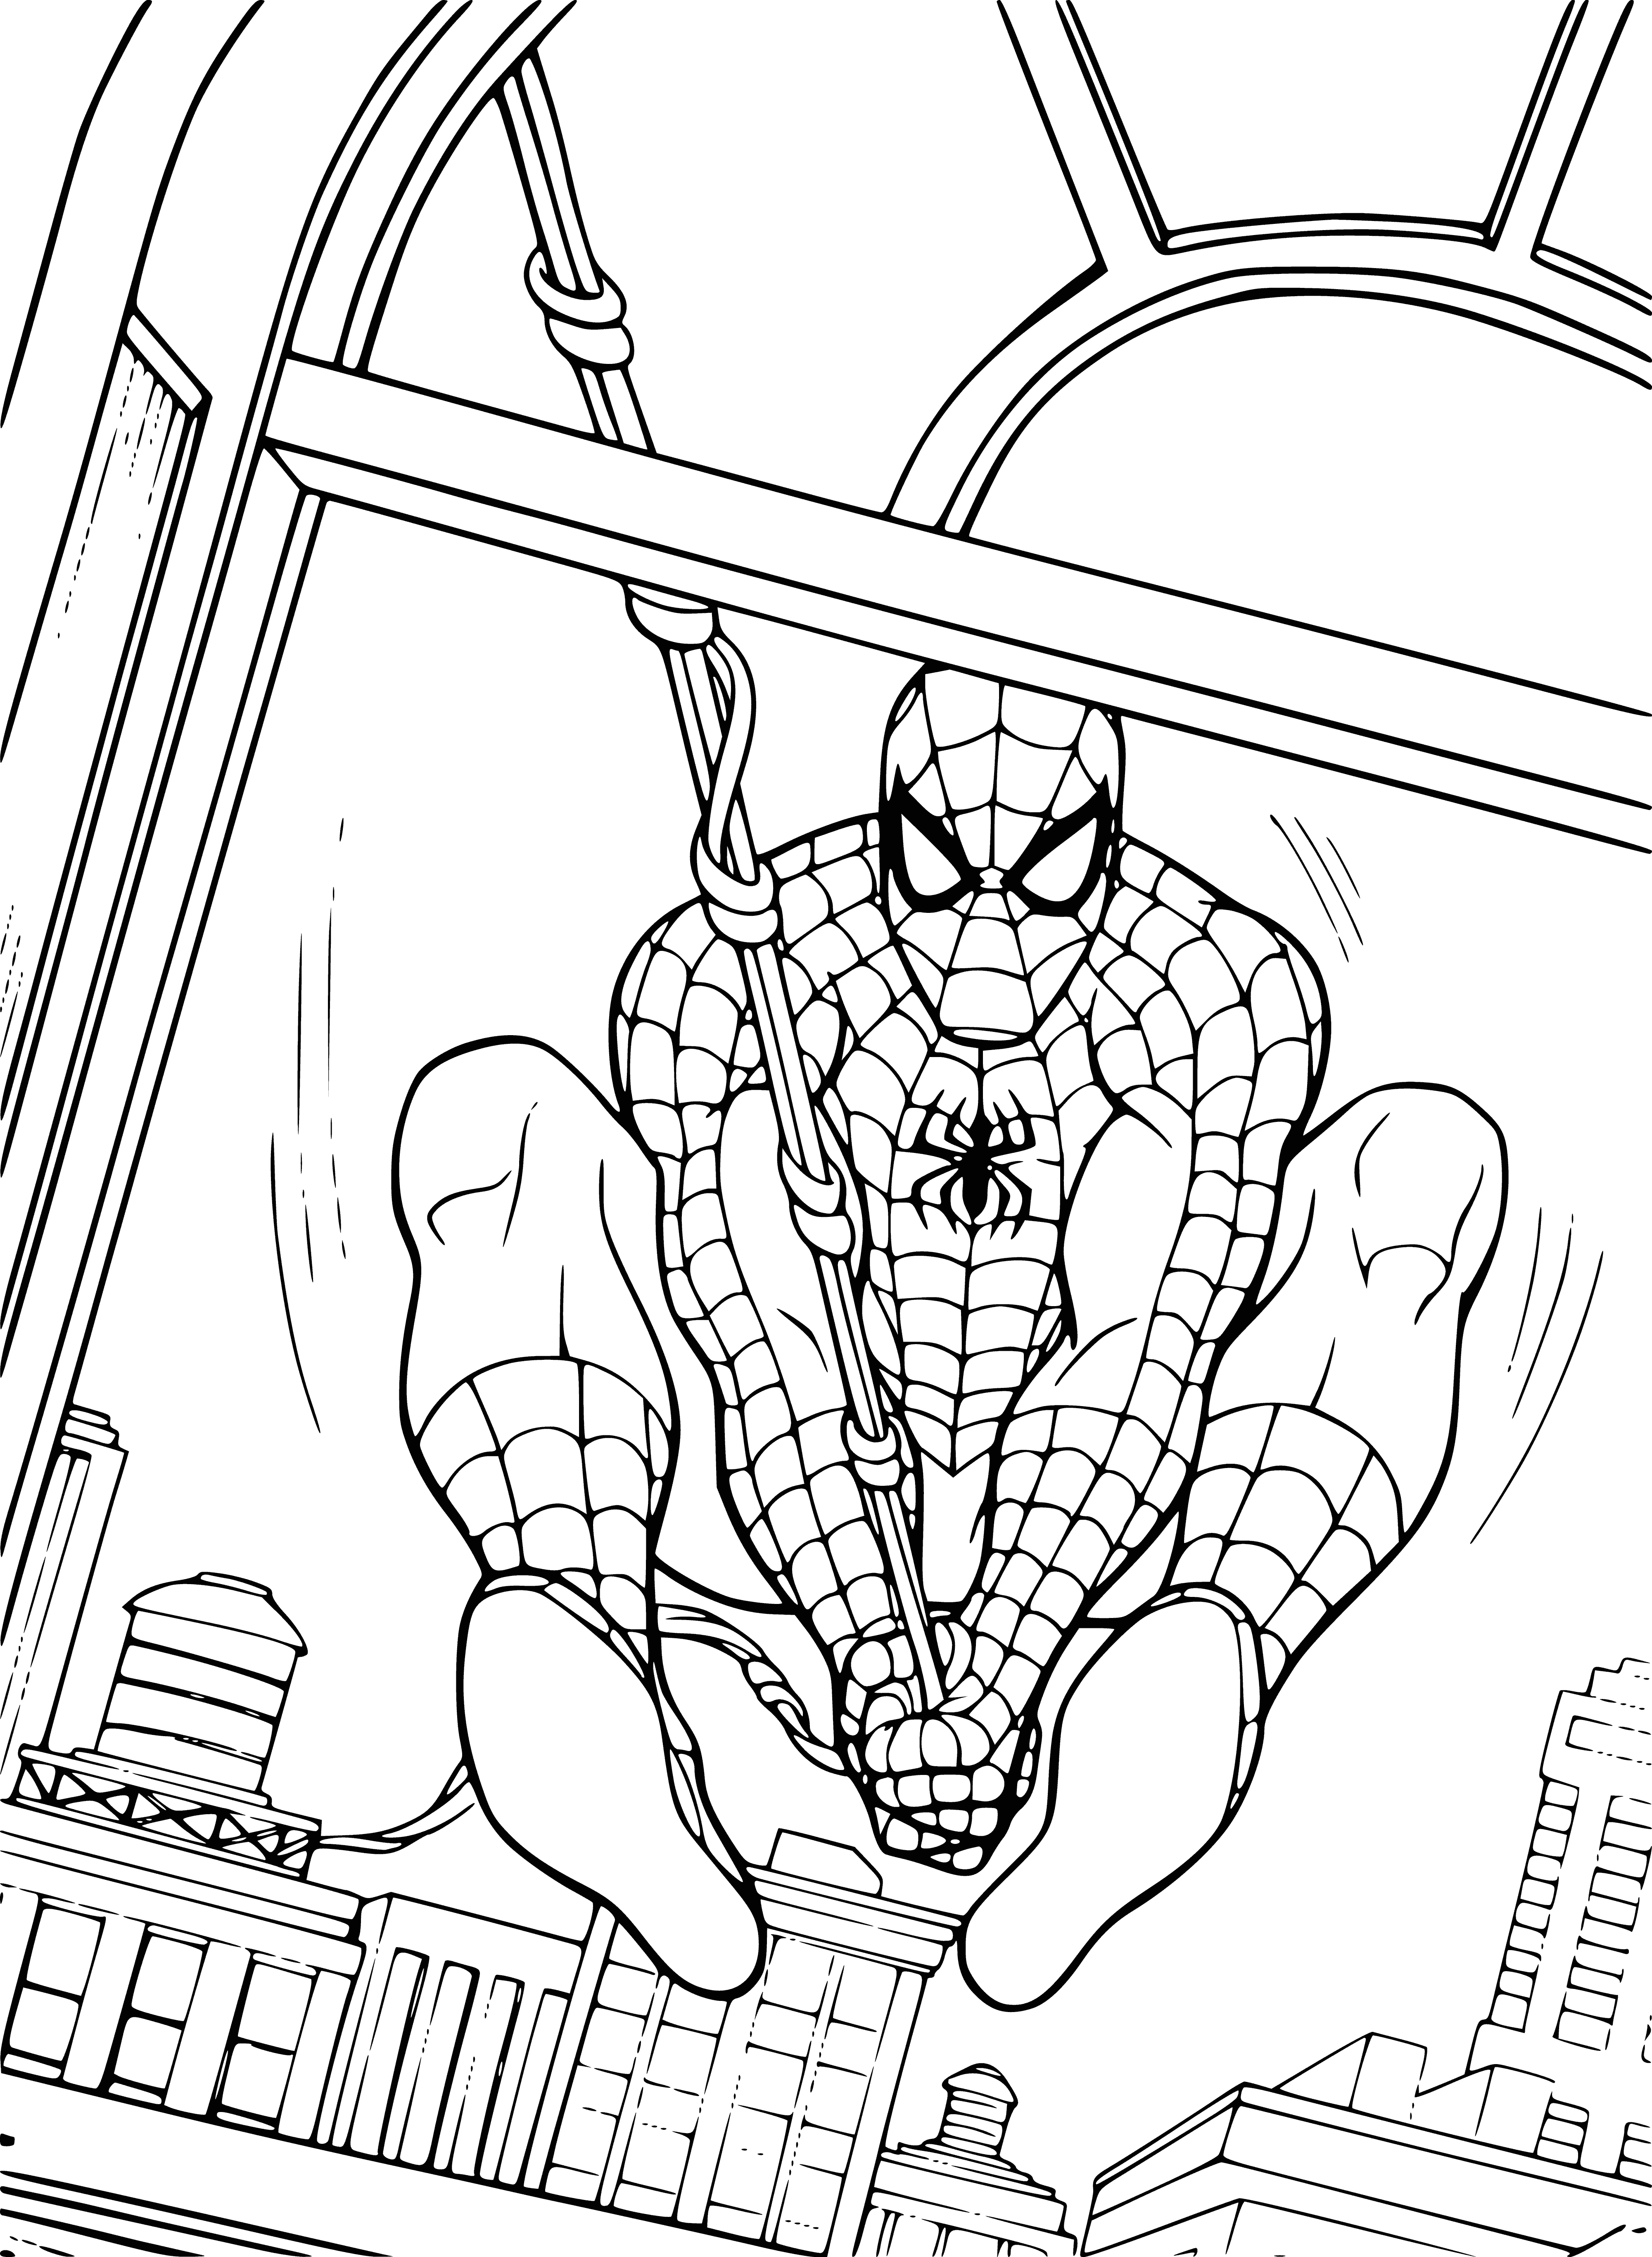 coloring page: Spider-Man stands atop a building, ready to fight in his red & blue suit with a red spider symbol & black mask. Fists clenched, he's ready for action!